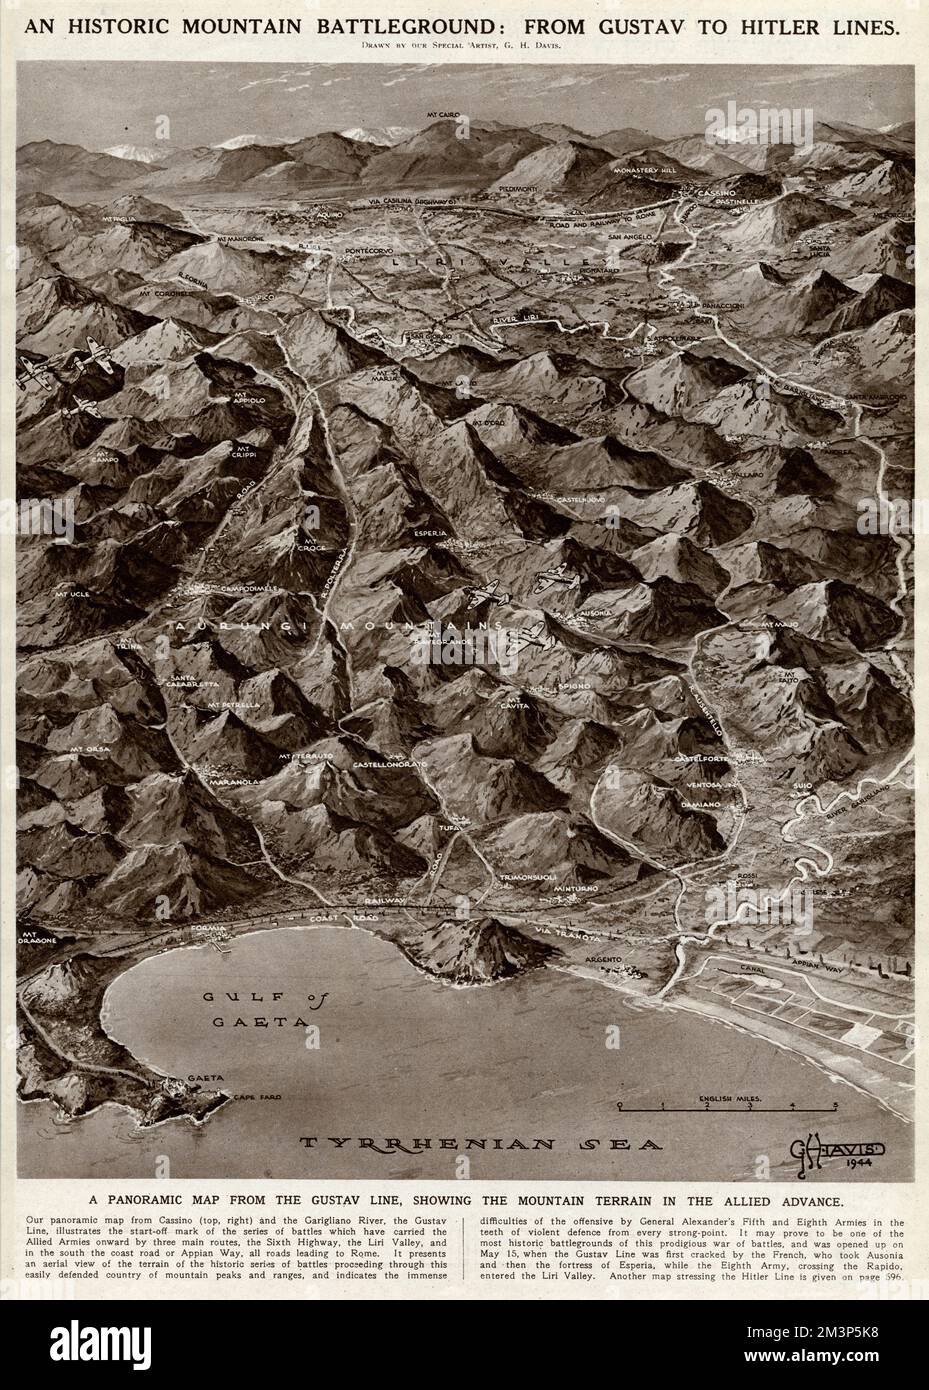 An historic mountain battleground during the Second World War: from Gustav to Hitler Lines (from Cassino, top right).  A panoramic map showing the mountain terrain in the Allied advance in Italy towards Rome. Stock Photo